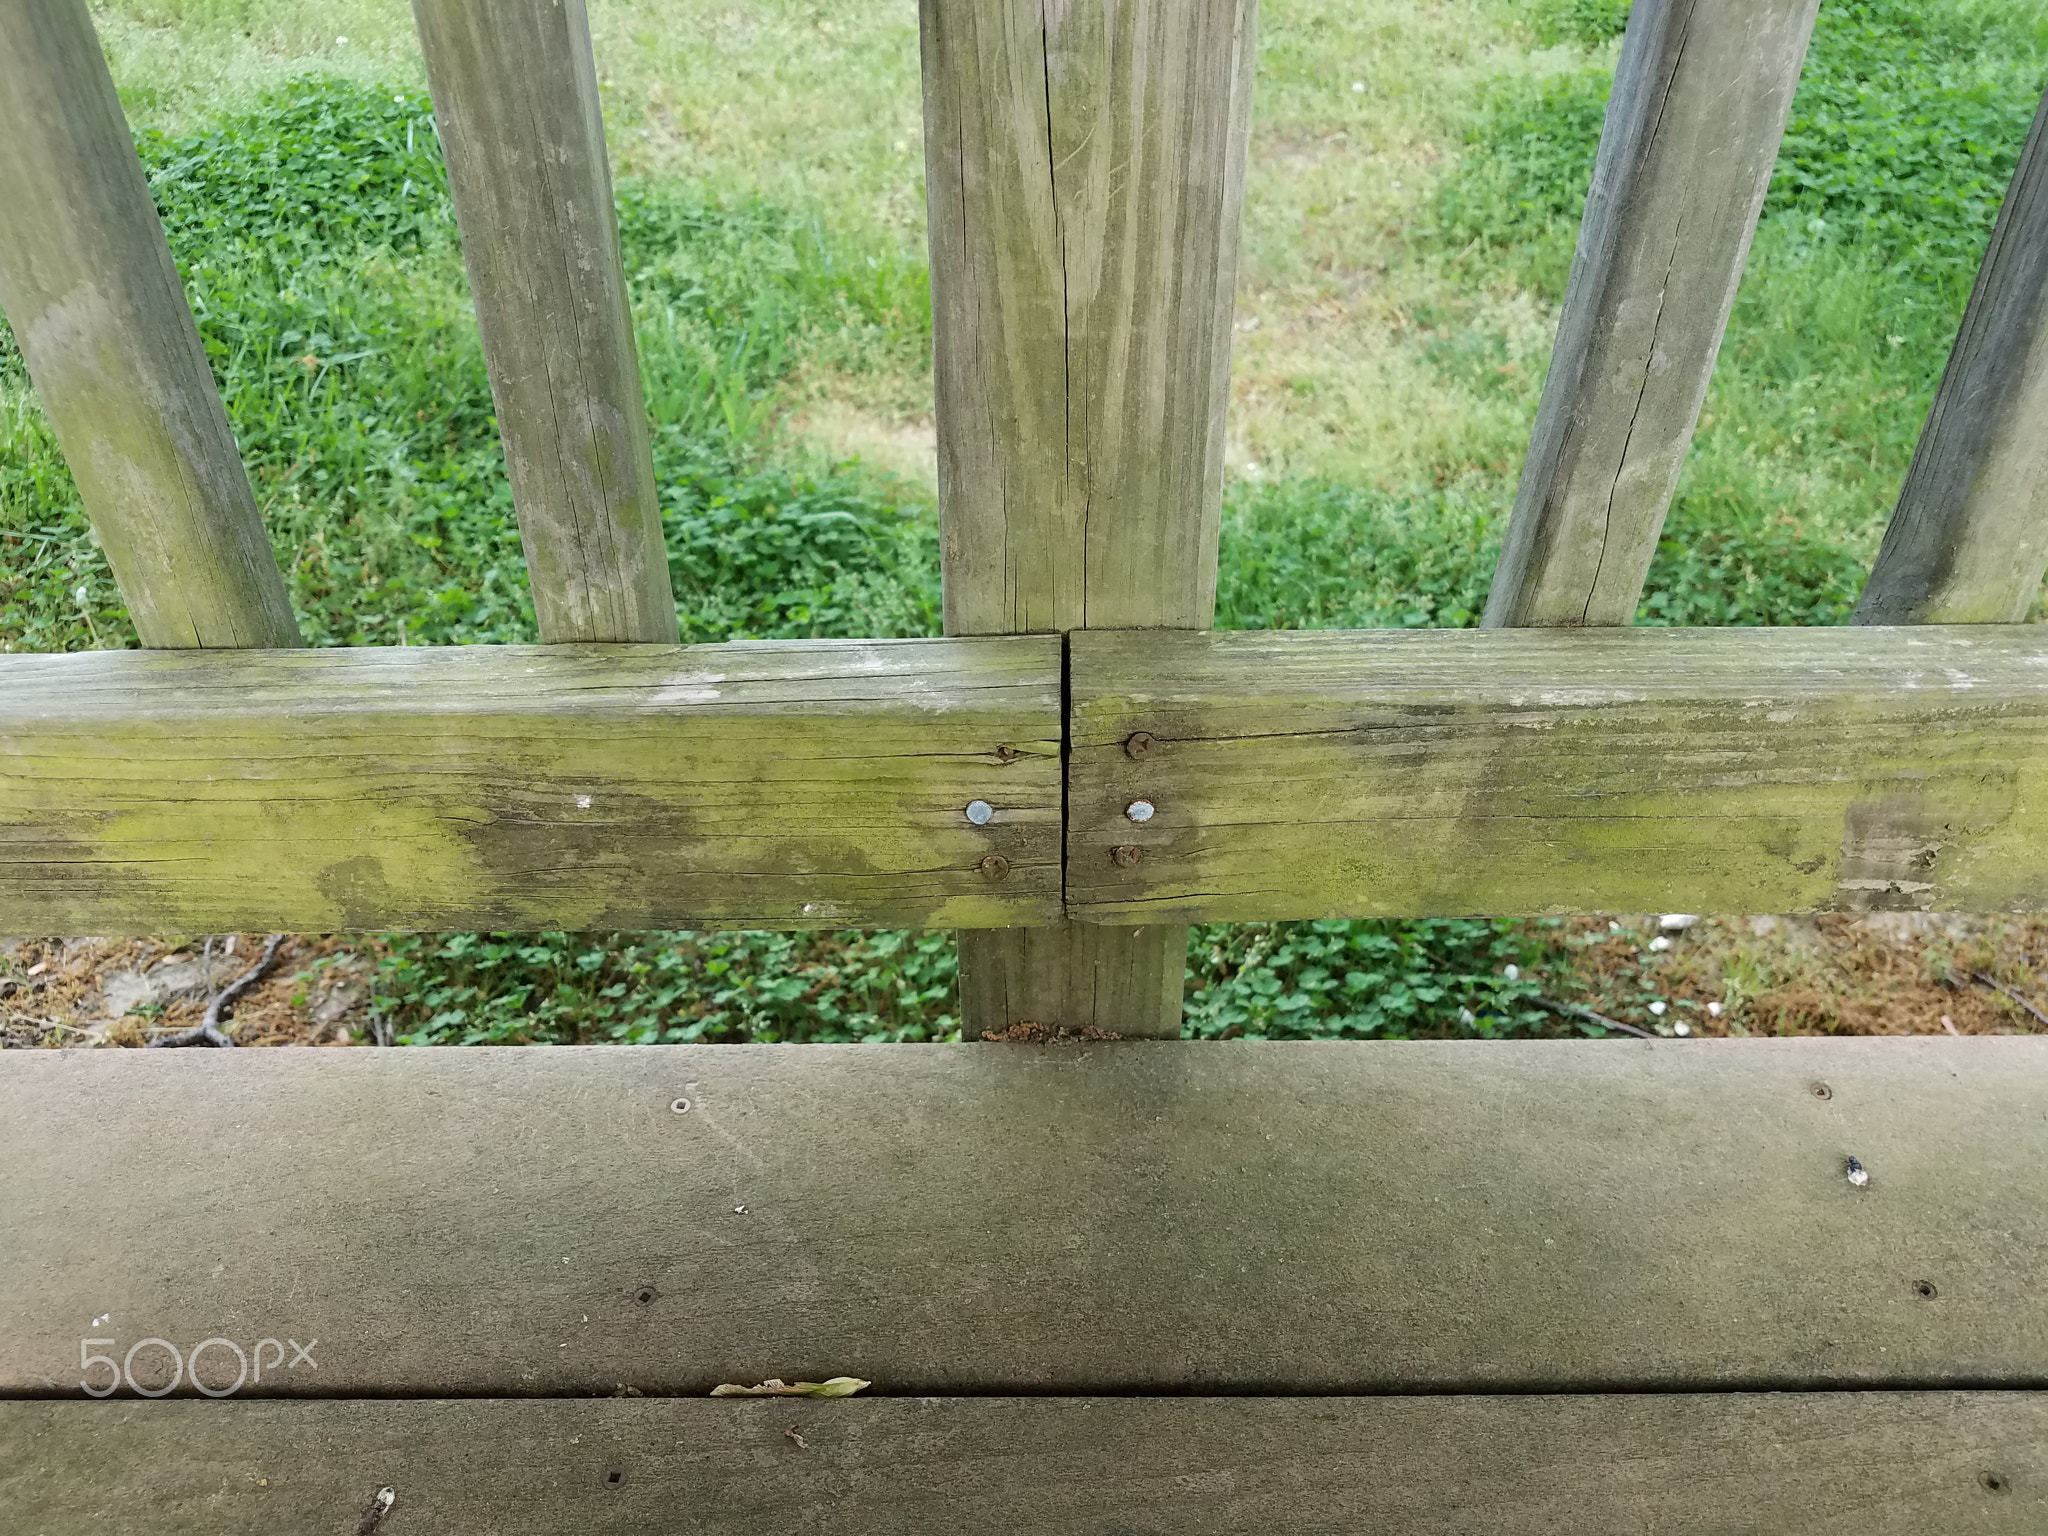 weathered or worn discolored wood deck with green algae